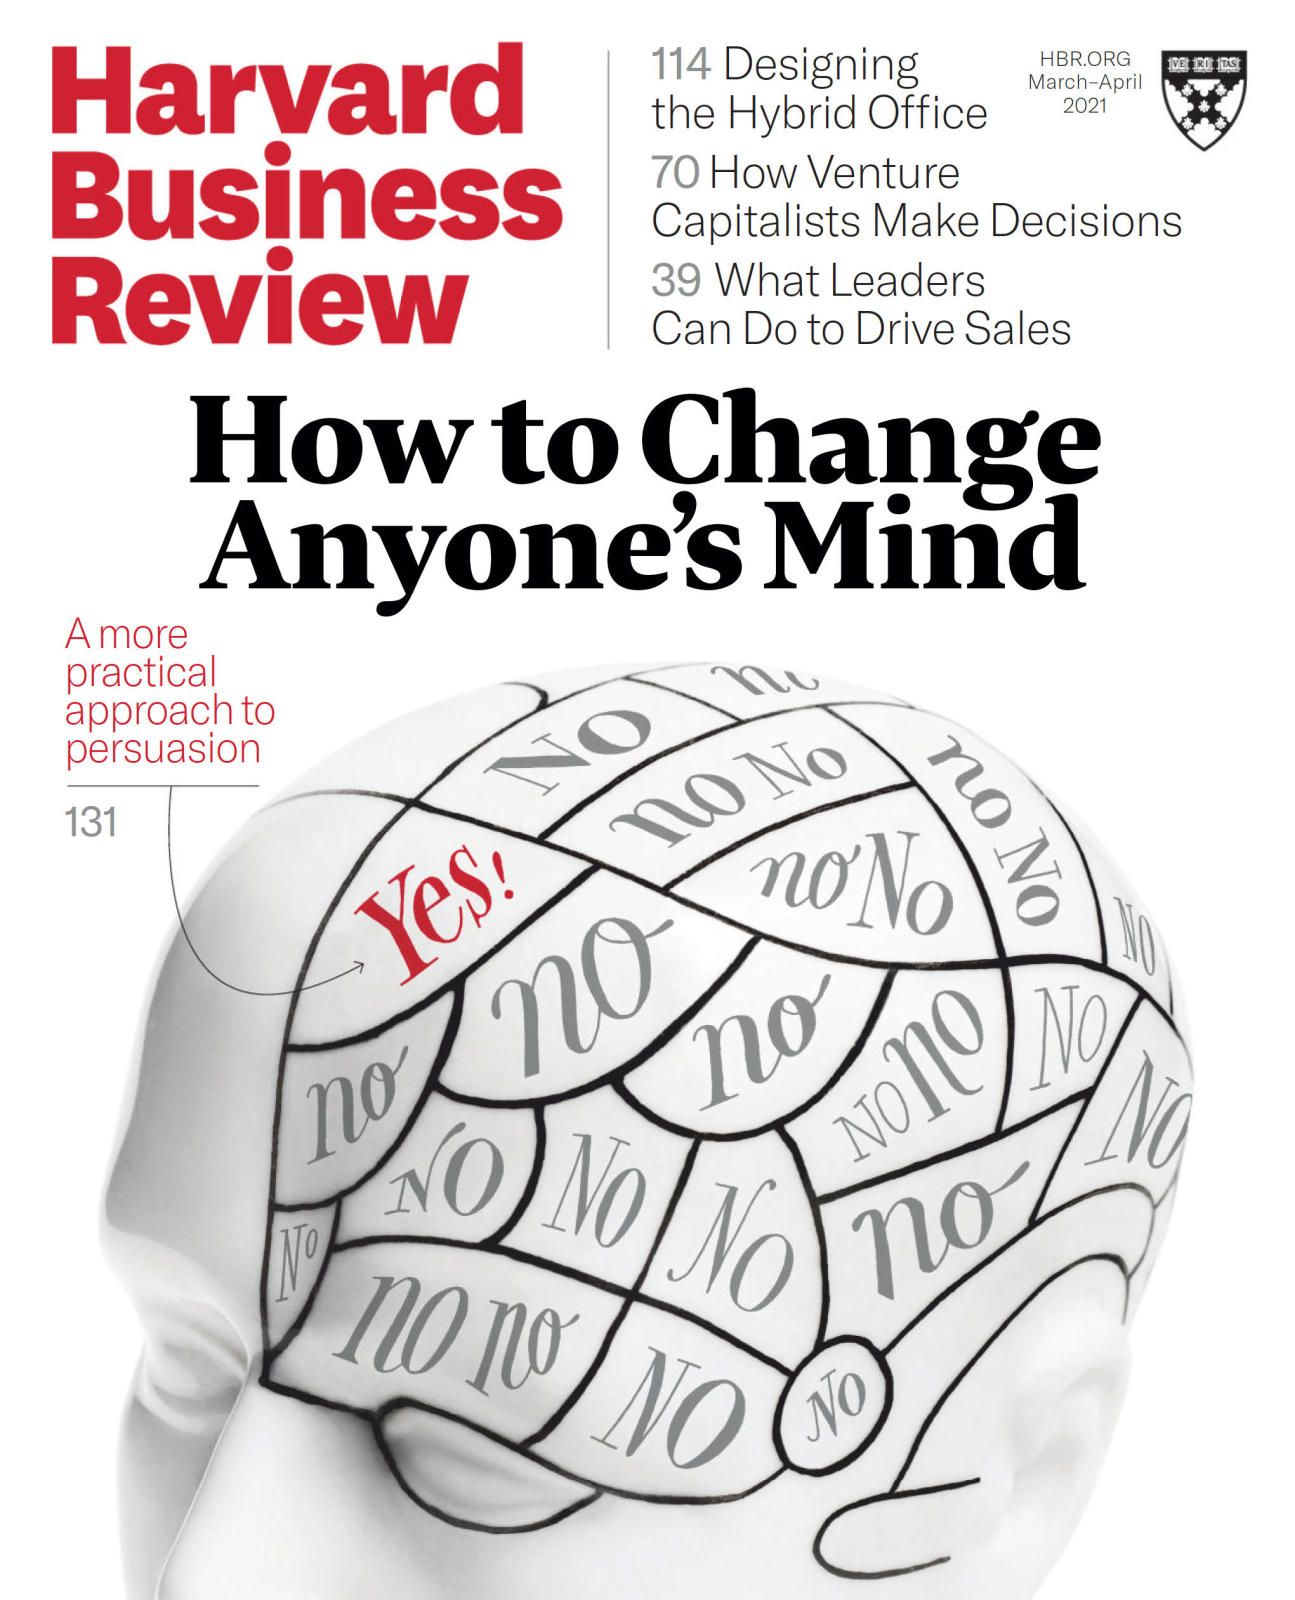 Harvard Business Review 哈佛商业评论 MARCH&APRIL 2021年3月&4月刊